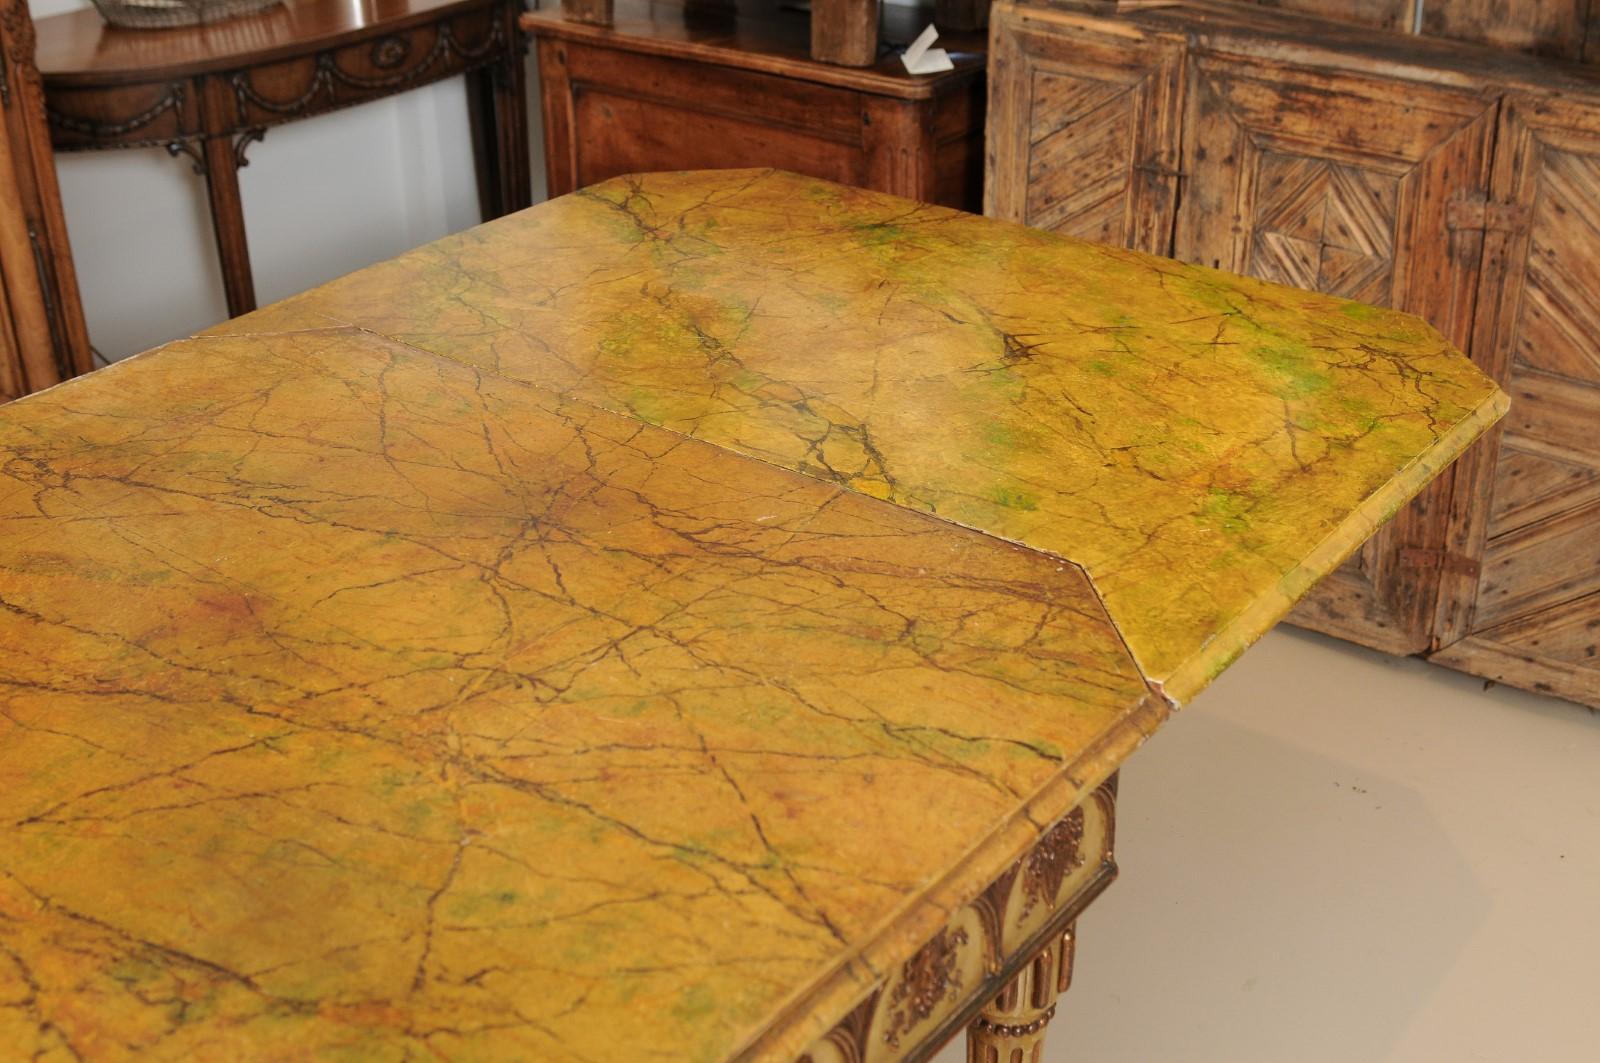 Italian Neapolitan Style Painted Dining Table with Faux Marbleized Top, Fluted Legs & 2 Leaves, first half of the 20th century